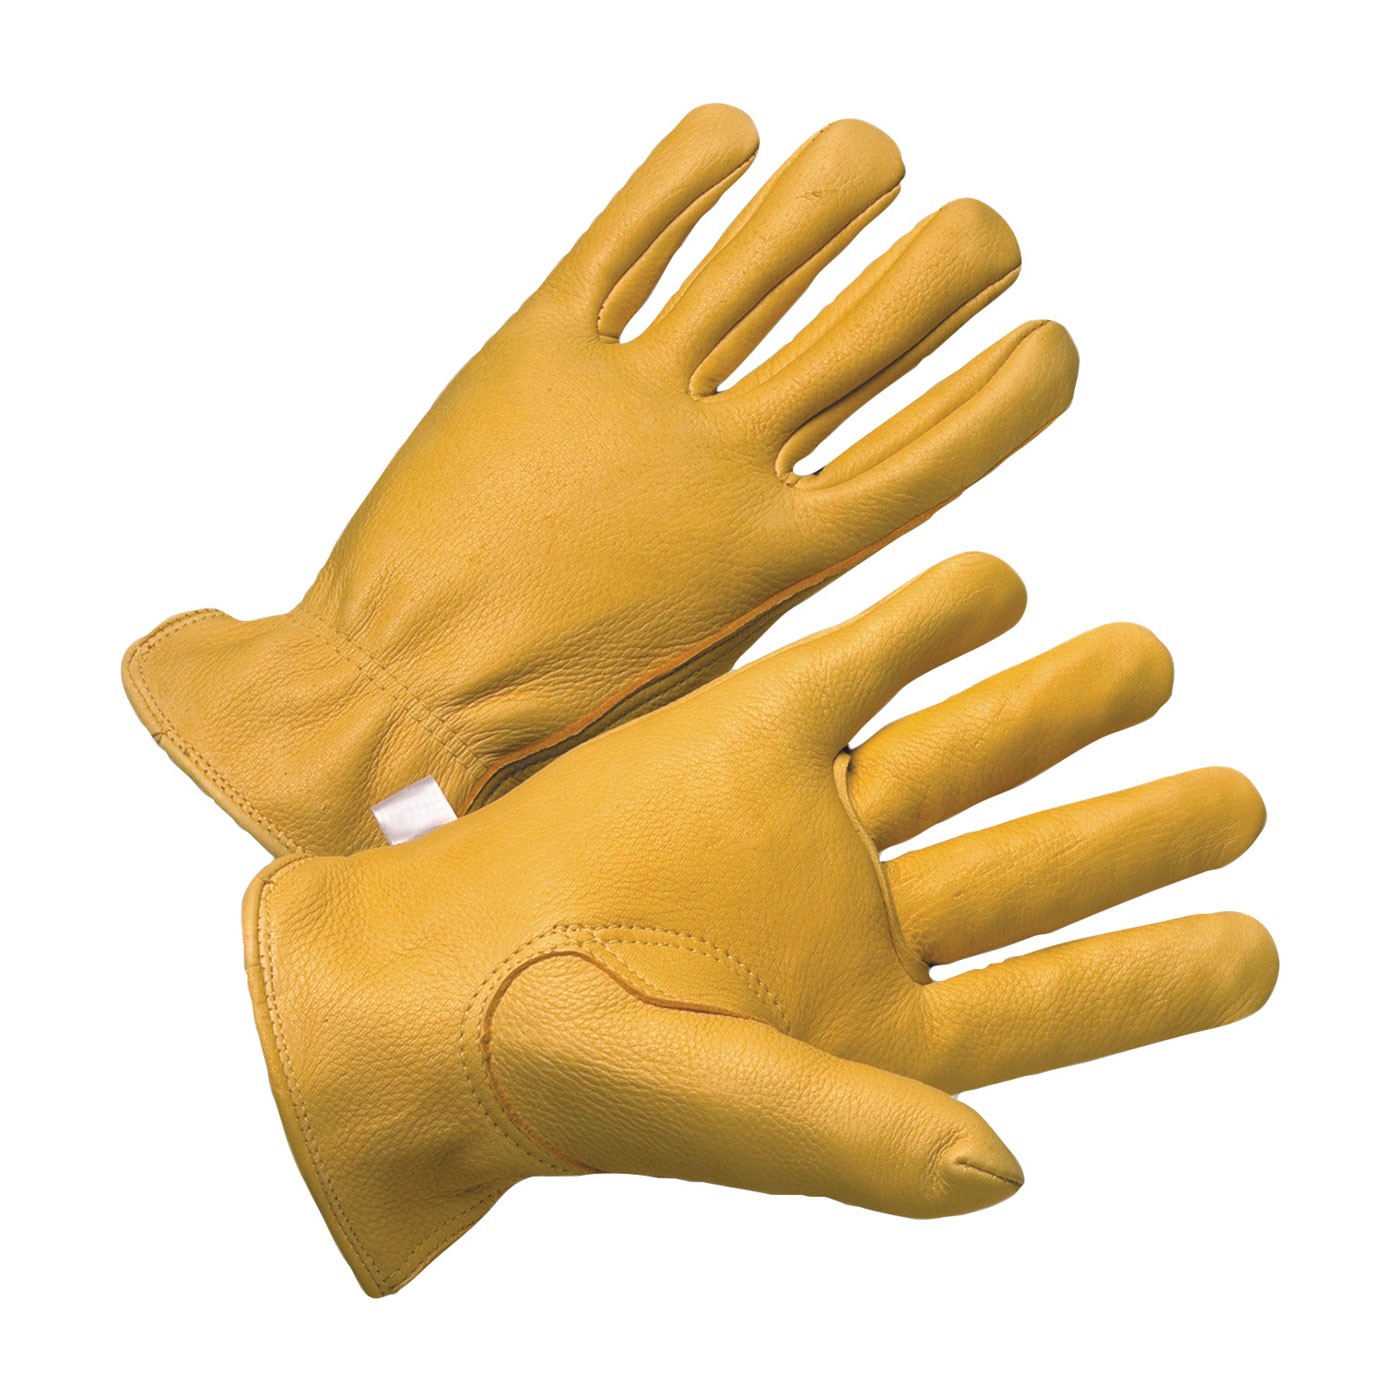 Posi-Therm® Top Grain Deerskin Leather Glove with Posi-Therm® Lining - Keystone Thumb  (#9920KT)